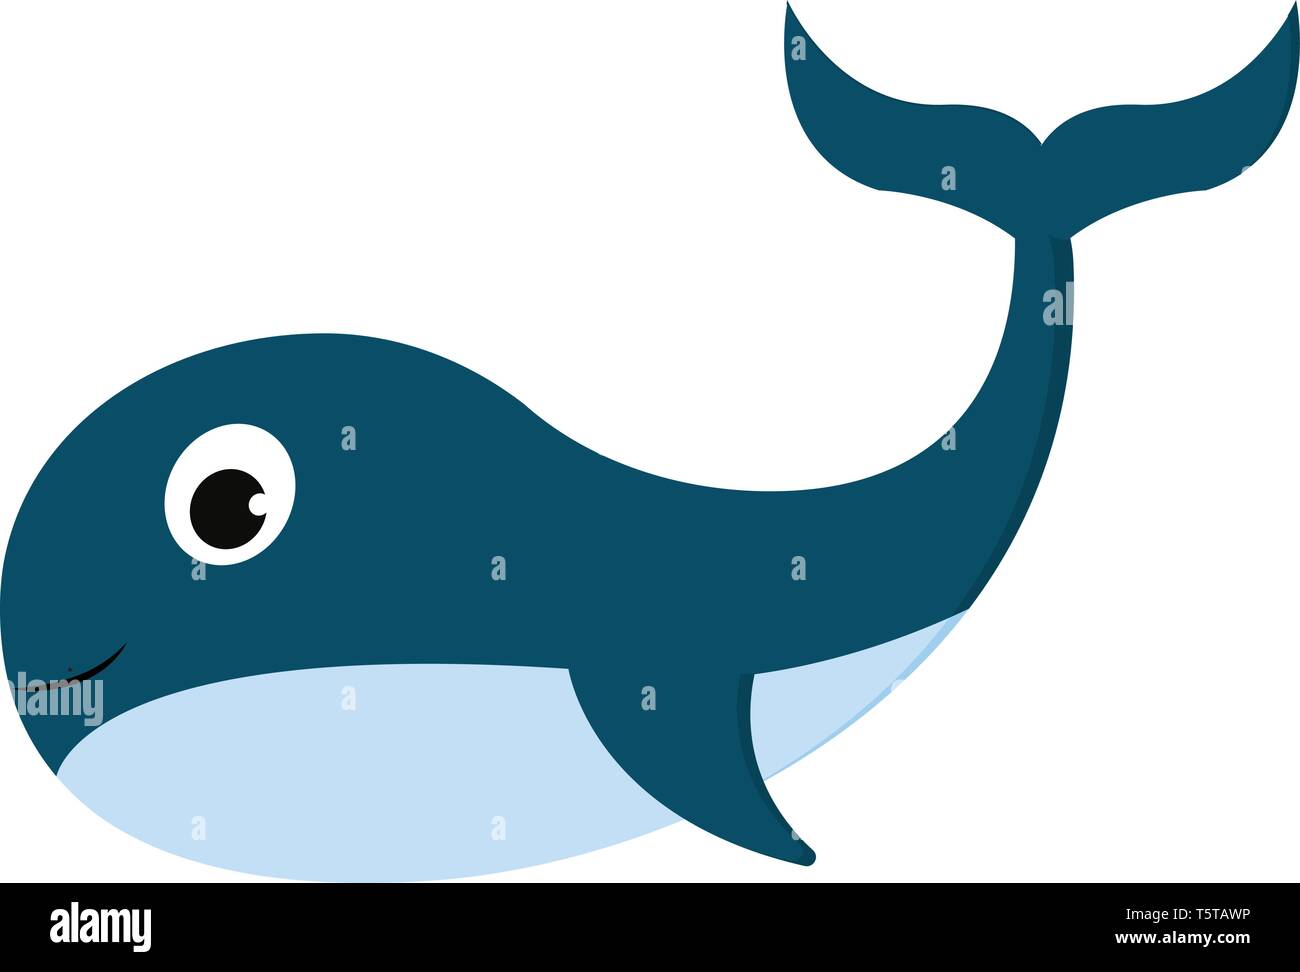 Clipart of a smiling blue-colored whale while swimming has a streamlined torpedo-shaped body with fins curved backward and a big round eye vector colo Stock Vector